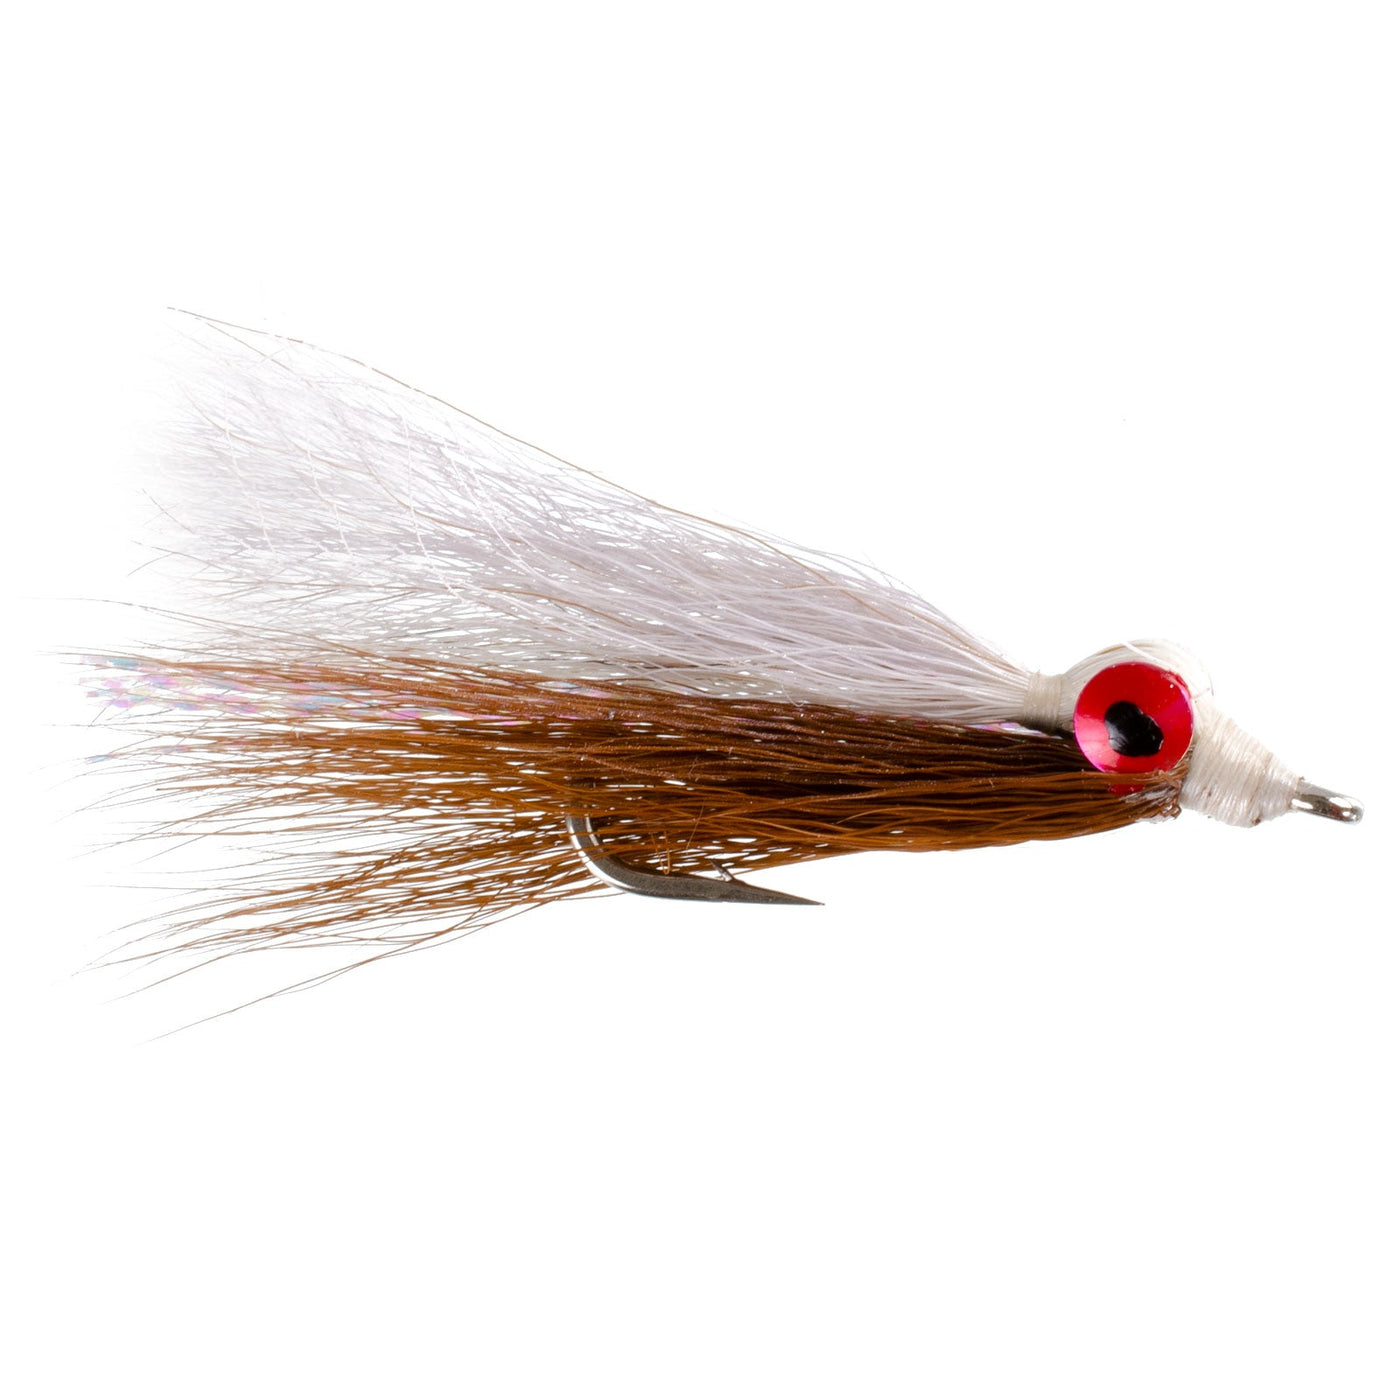 Clousers Deep Minnow Brown White - Streamer Fly Fishing Flies - 4 Saltwater and Bass Flies - Hook Size 1/0